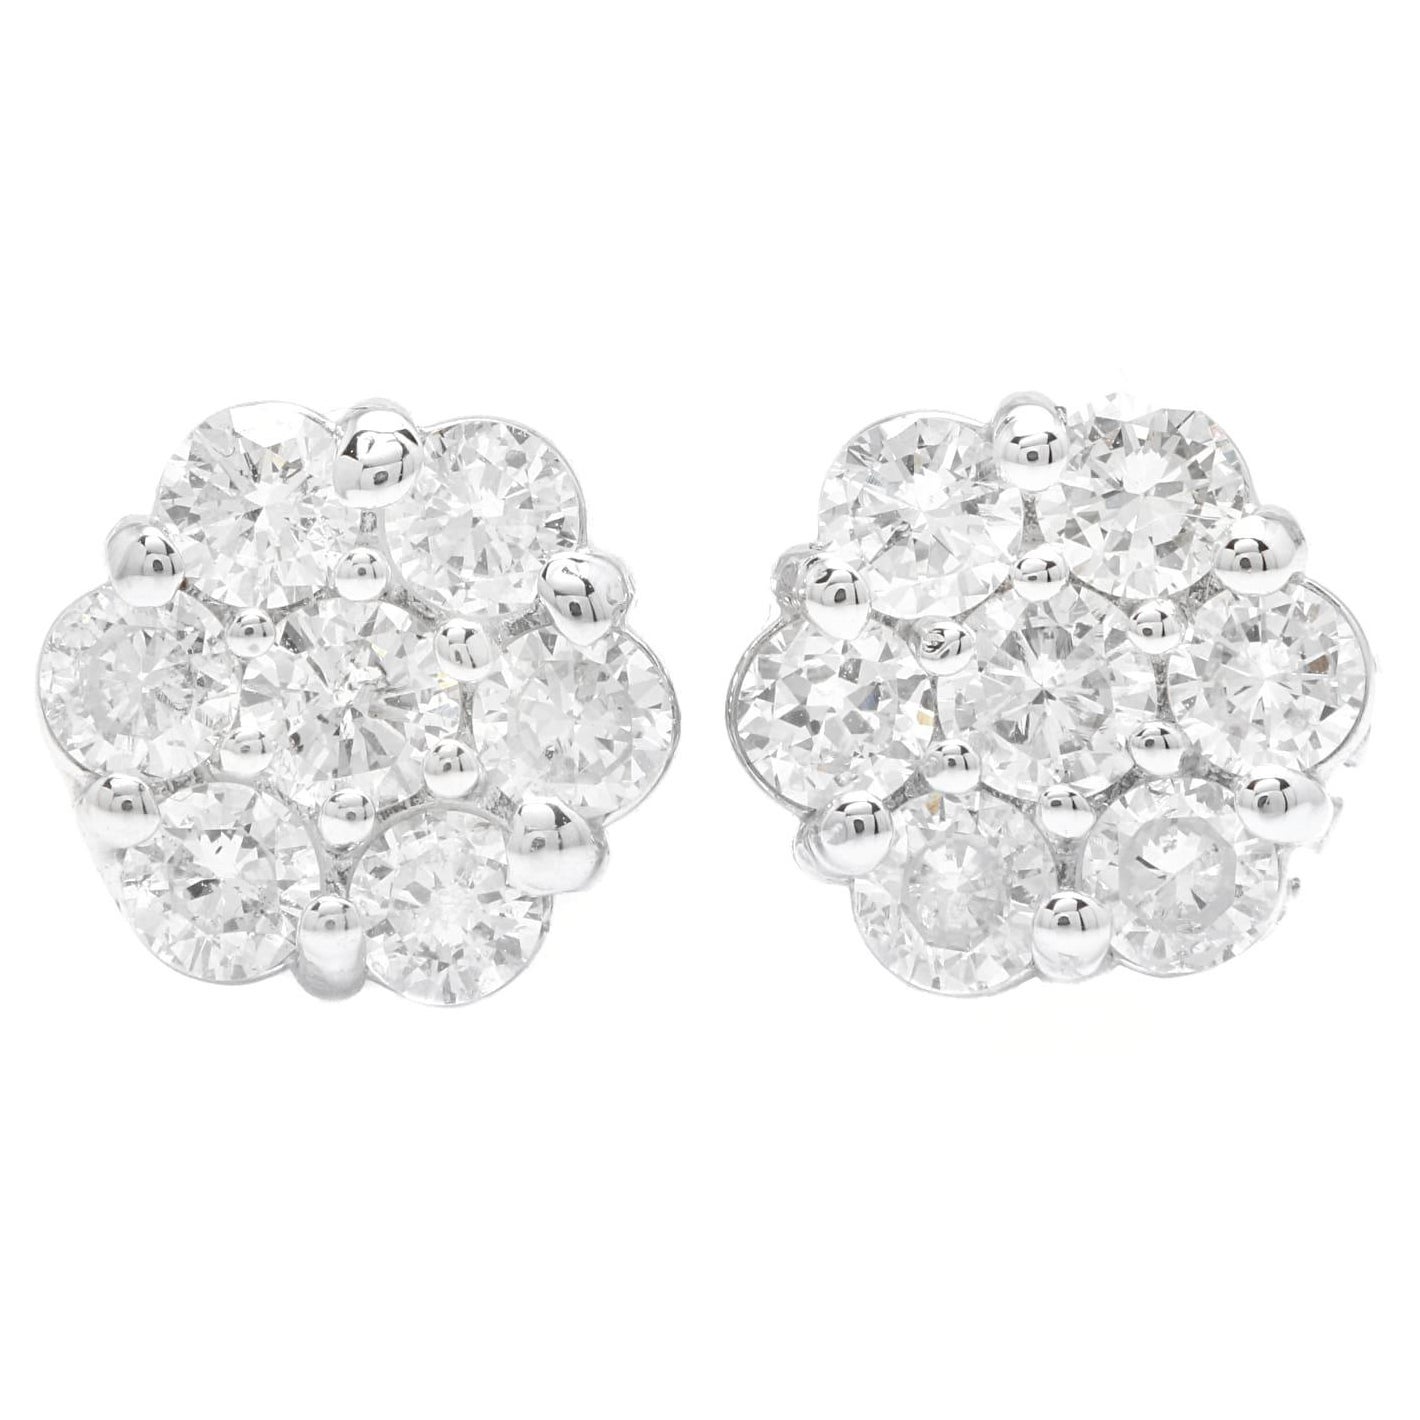 Exquisite 1.40 Carats Natural Diamond 14K Solid White Gold Stud Earrings For Sale